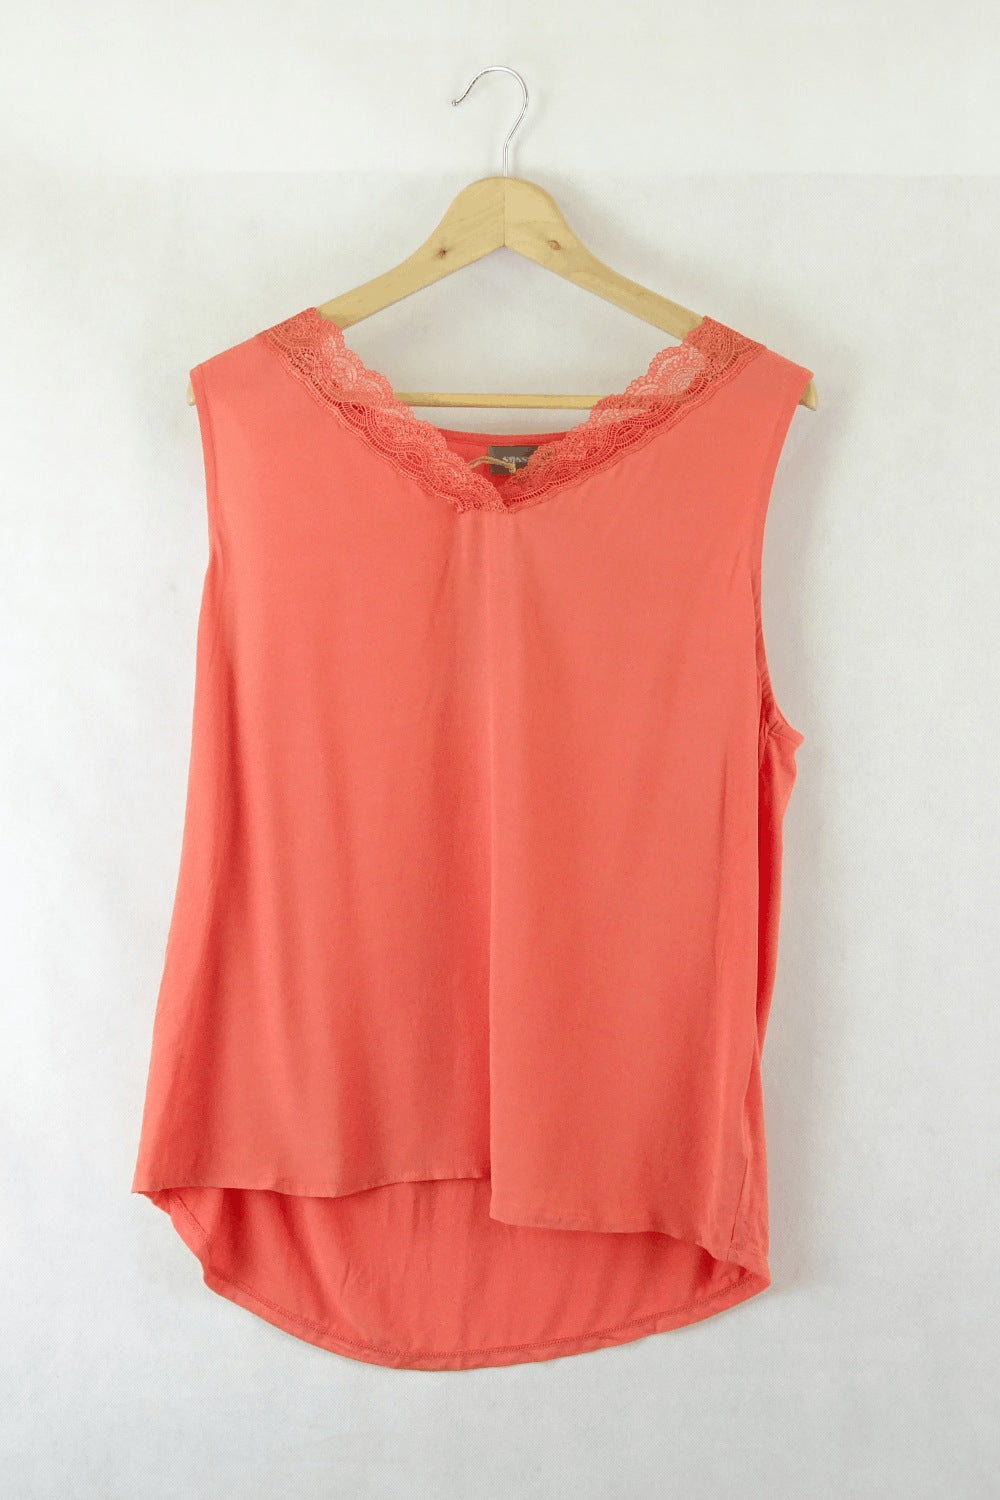 Sussan Sleeveless Coral Top L